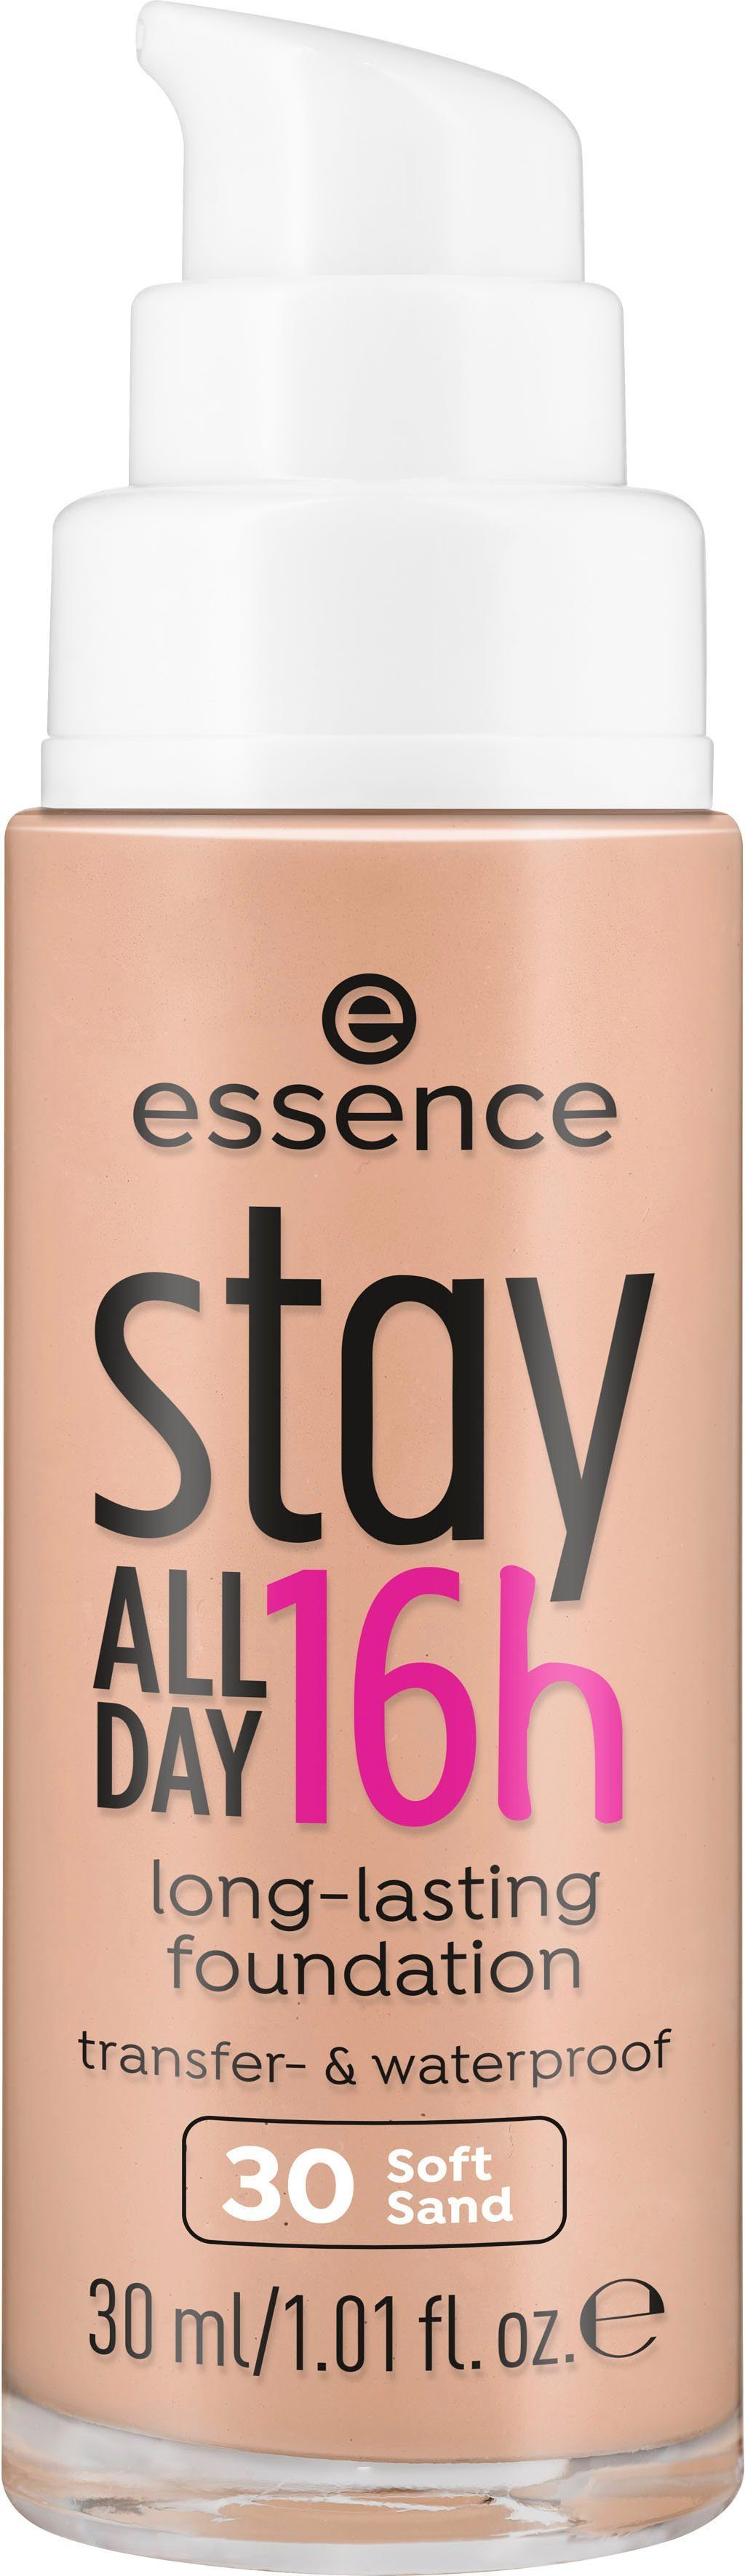 stay Foundation ALL Soft Essence long-lasting, Sand DAY 3-tlg. 16h